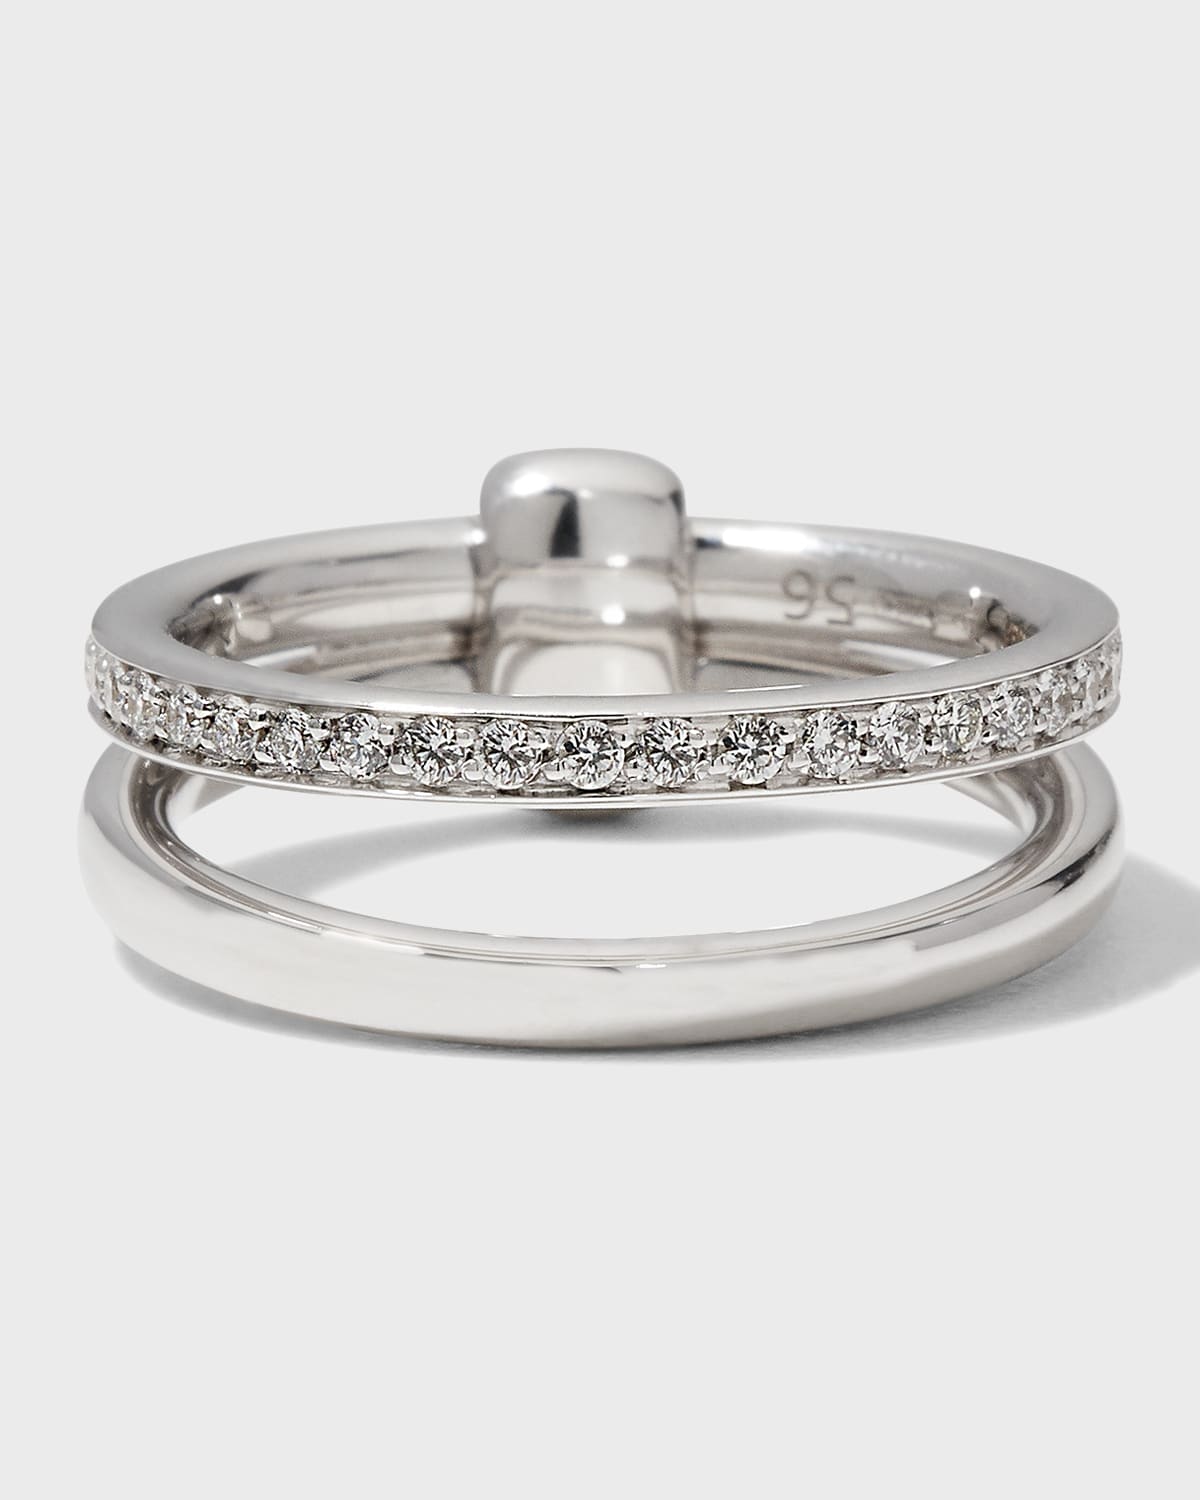 18K White Gold Iconica Ring with Diamonds, Size 57